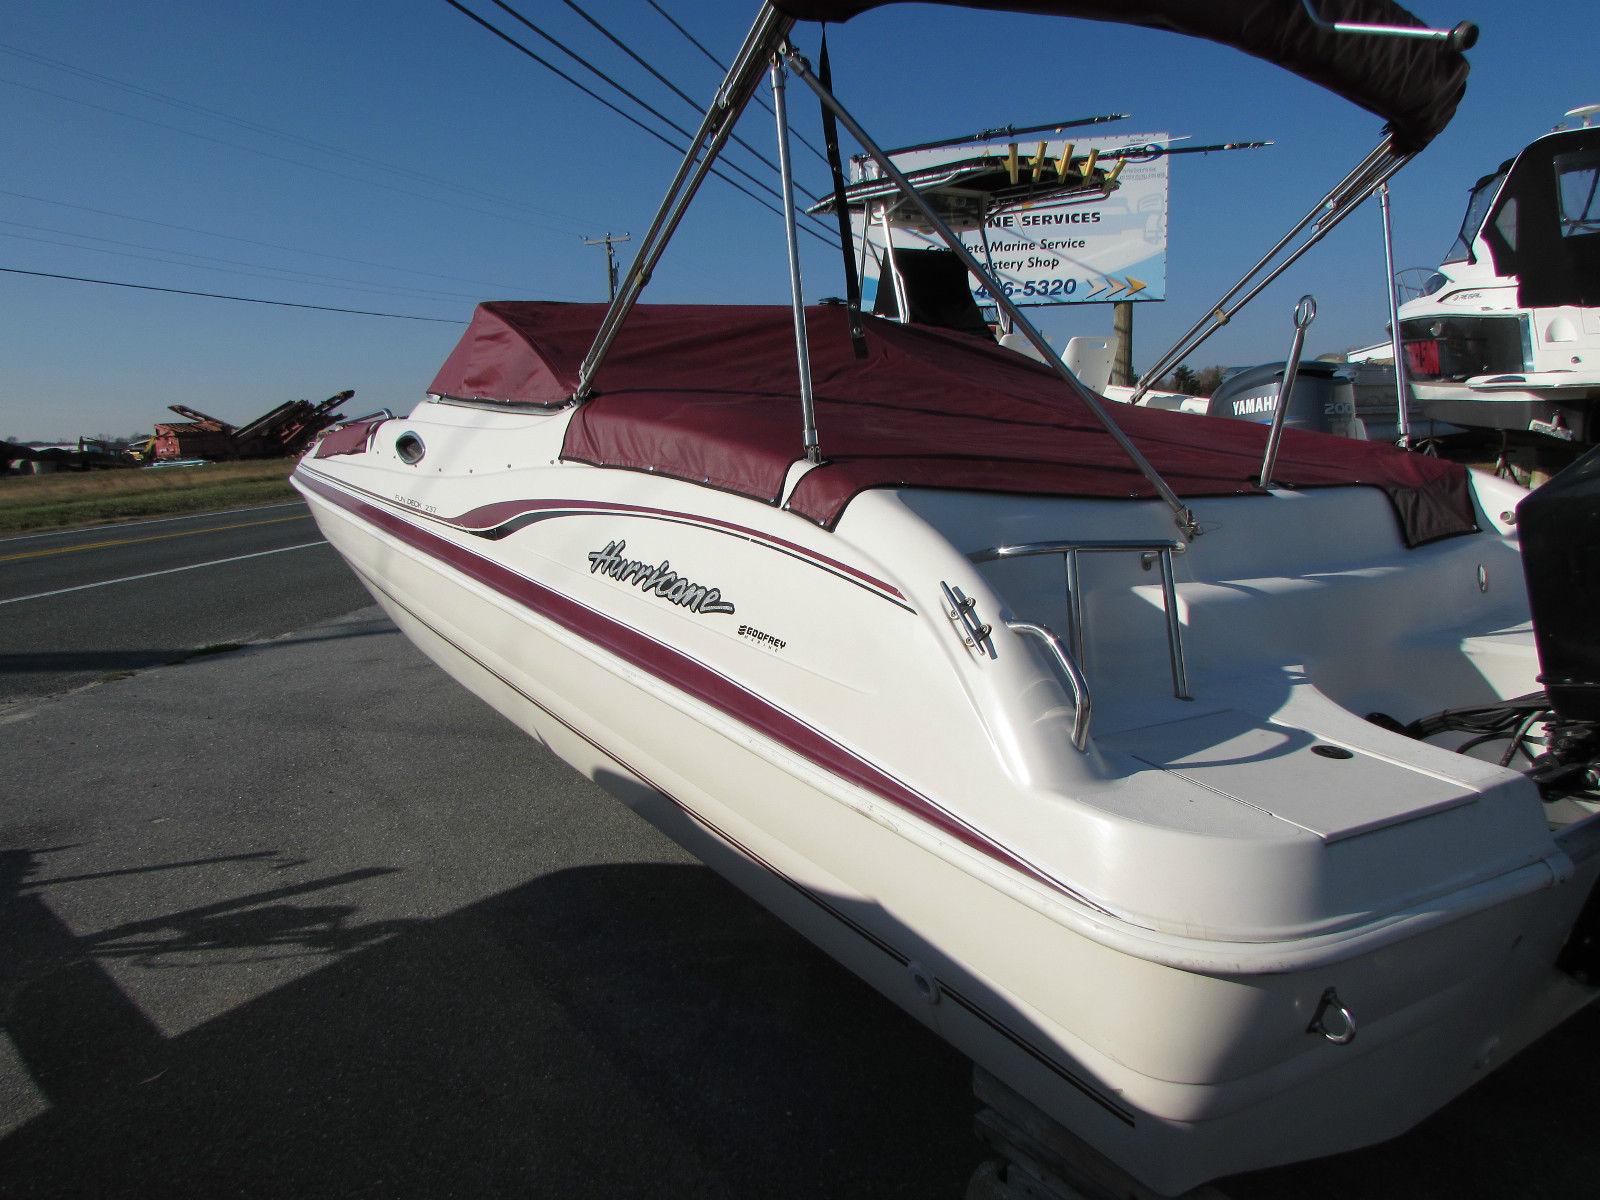 Hurricane Fun Deck 237 1999 for sale for $9,500 - Boats ...